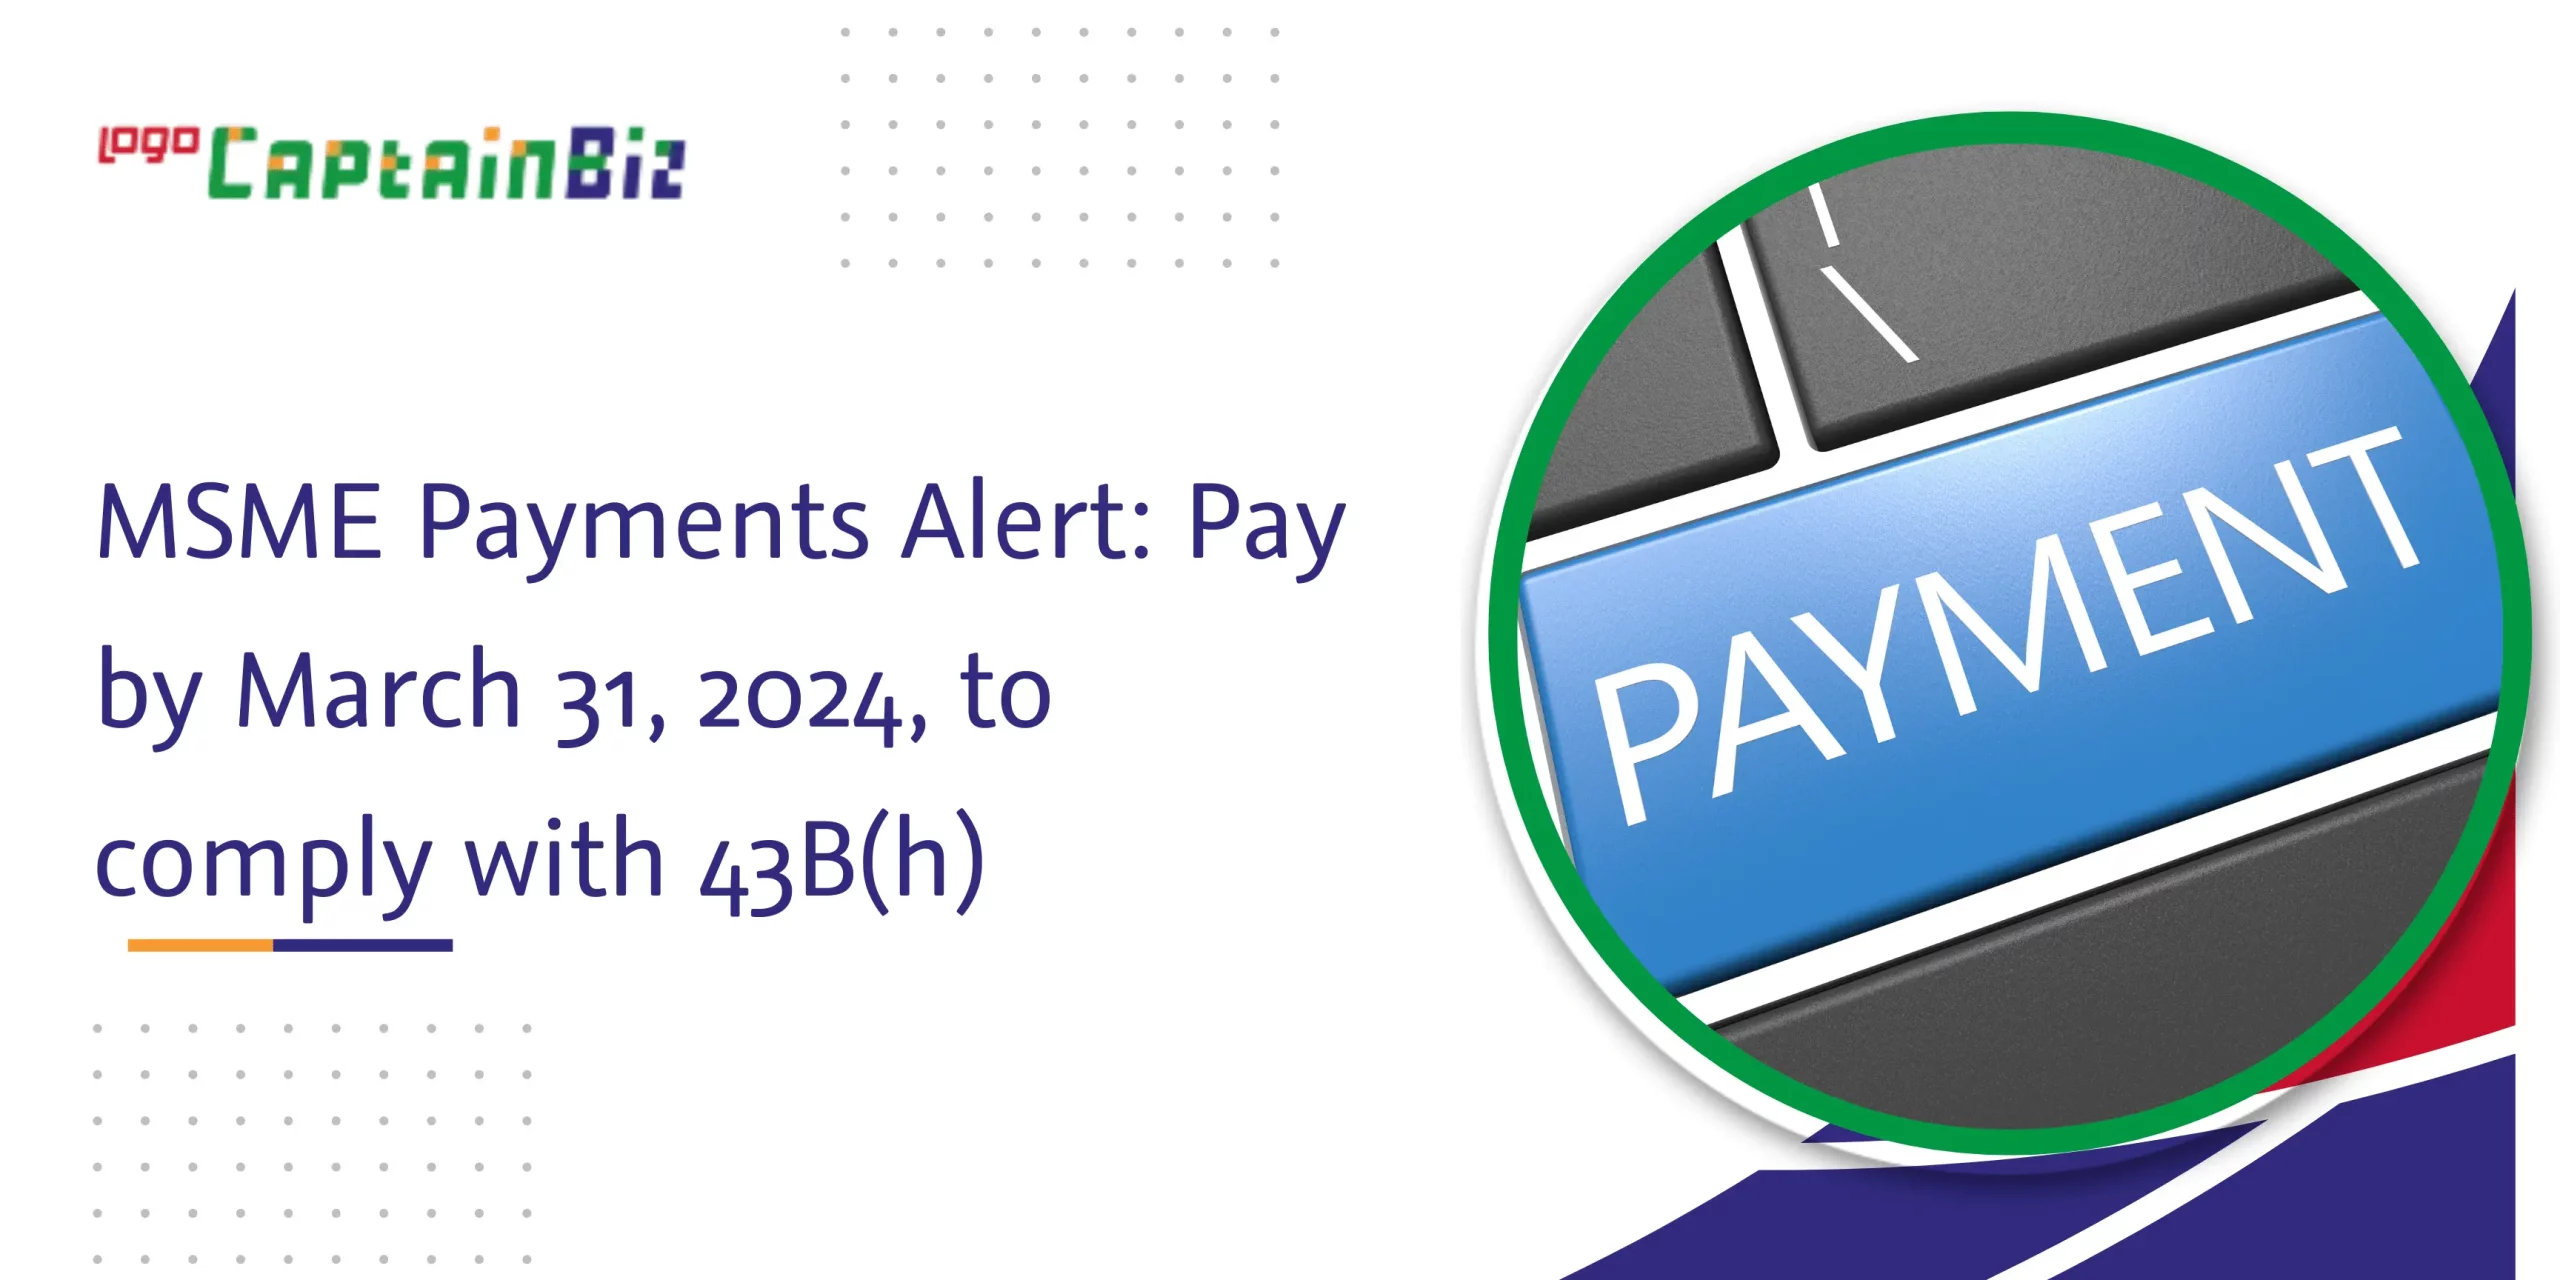 CaptainBiz: msme payments alert: pay by march 31, 2024, to comply with 43b(h)